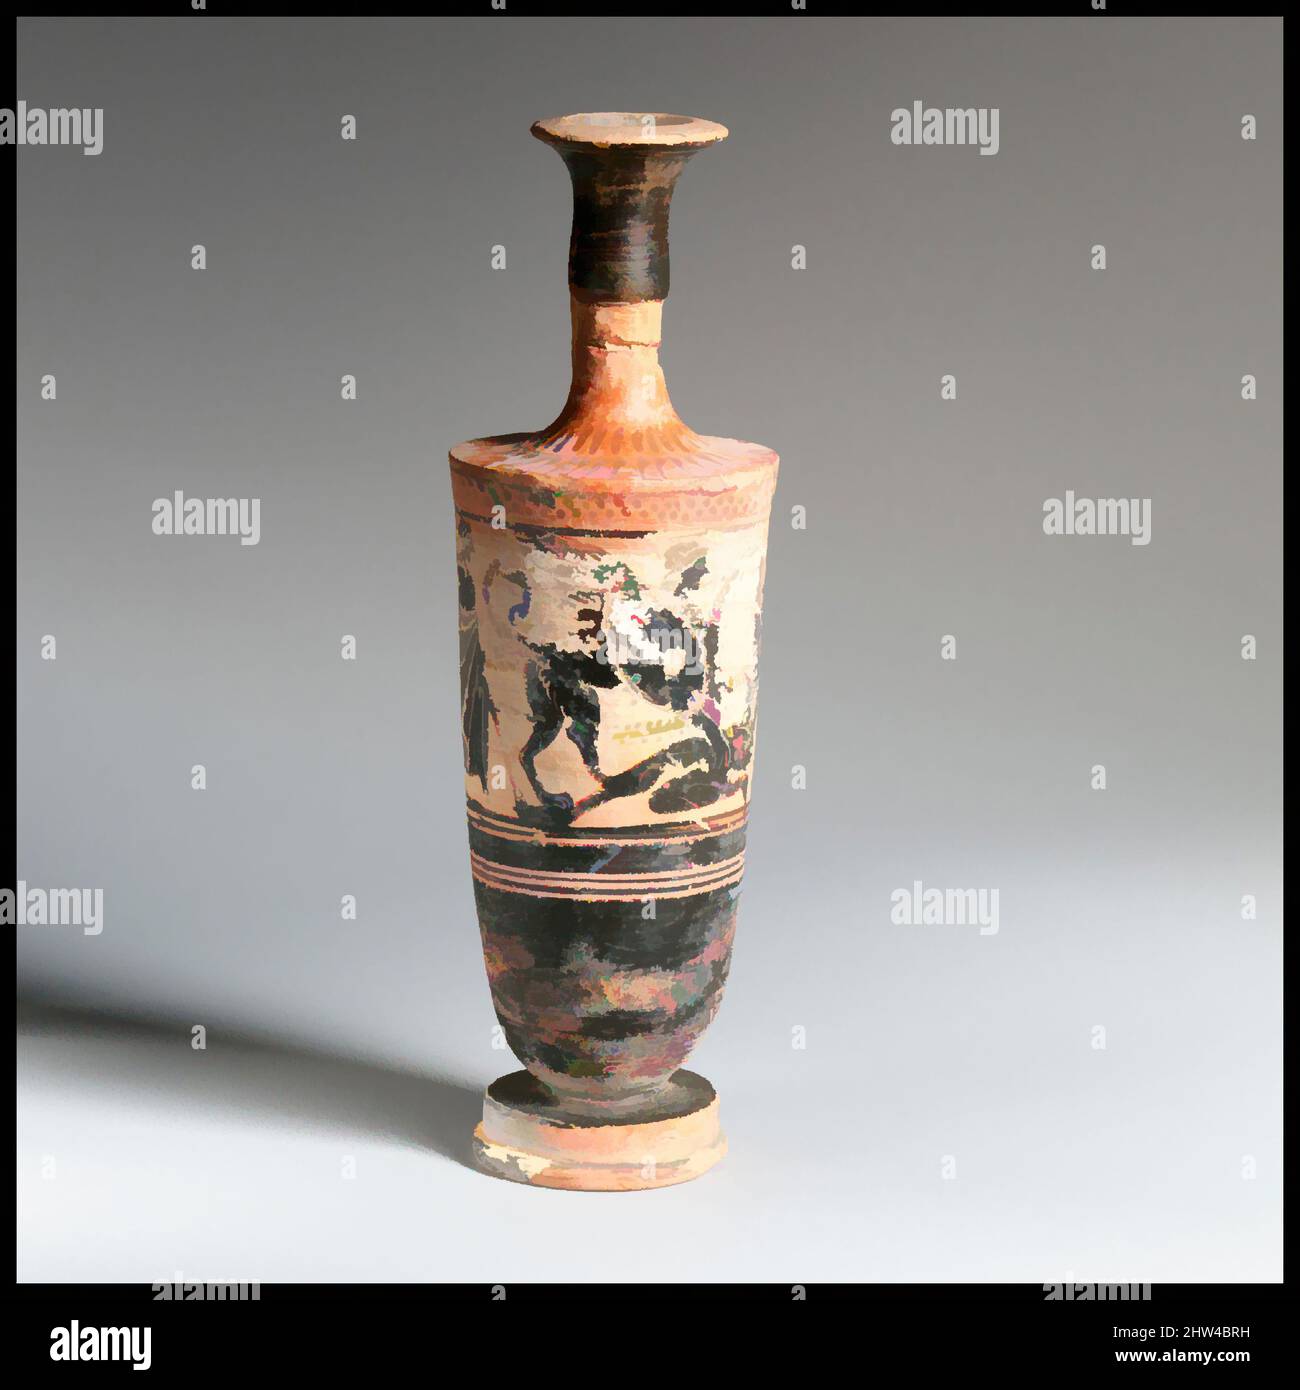 Art inspired by Terracotta lekythos (oil flask), Archaic, 1st quarter of 5th century B.C., Greek, Attic, Terracotta; black-figure, white-ground, Overall: 7 1/16in. (18cm), Vases, Sphinx seizing youth, Classic works modernized by Artotop with a splash of modernity. Shapes, color and value, eye-catching visual impact on art. Emotions through freedom of artworks in a contemporary way. A timeless message pursuing a wildly creative new direction. Artists turning to the digital medium and creating the Artotop NFT Stock Photo